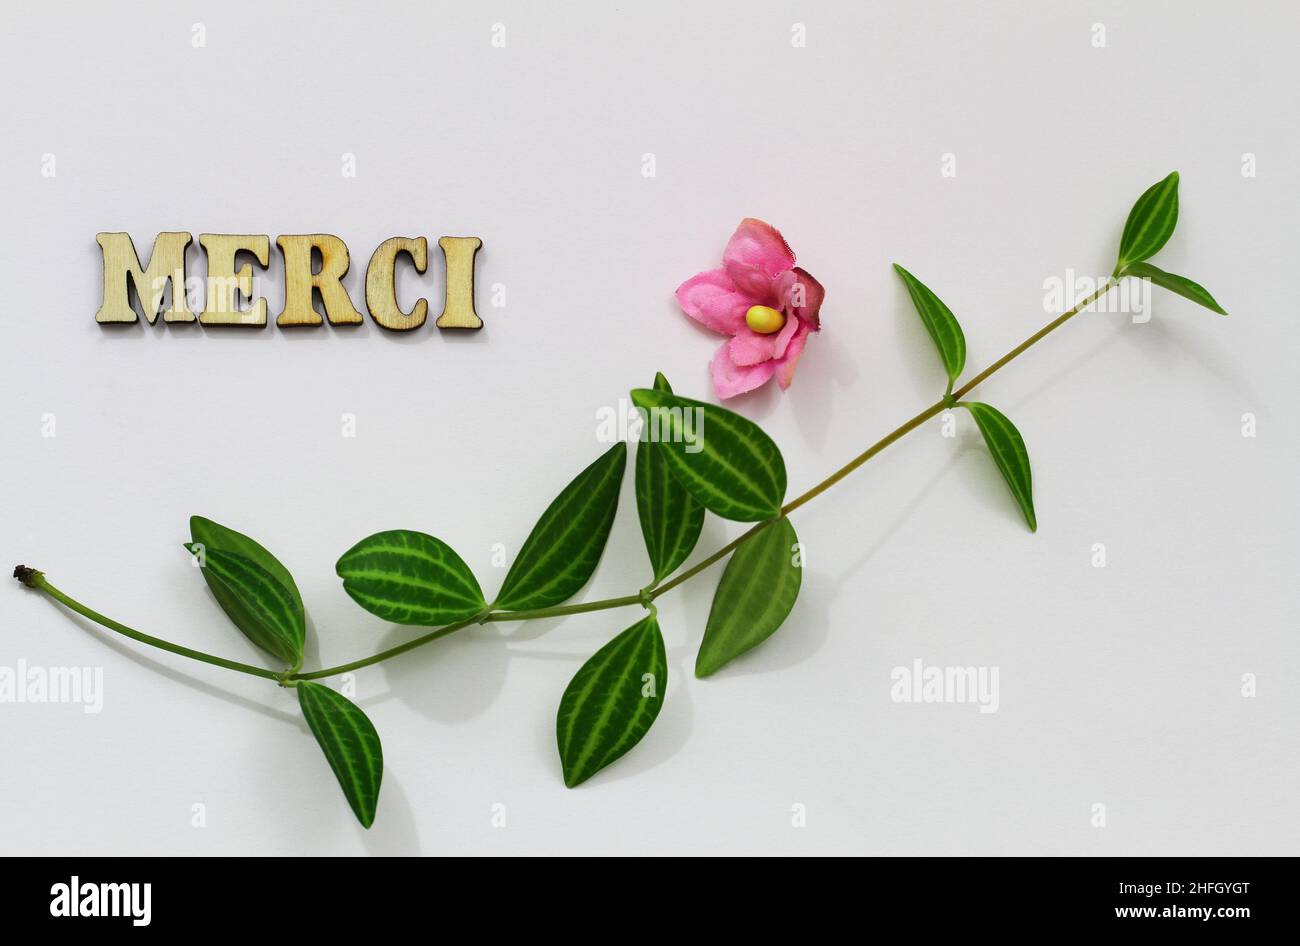 Merci (thank you in French) written with wooden letters on white surface with green leaves and pink flower Stock Photo